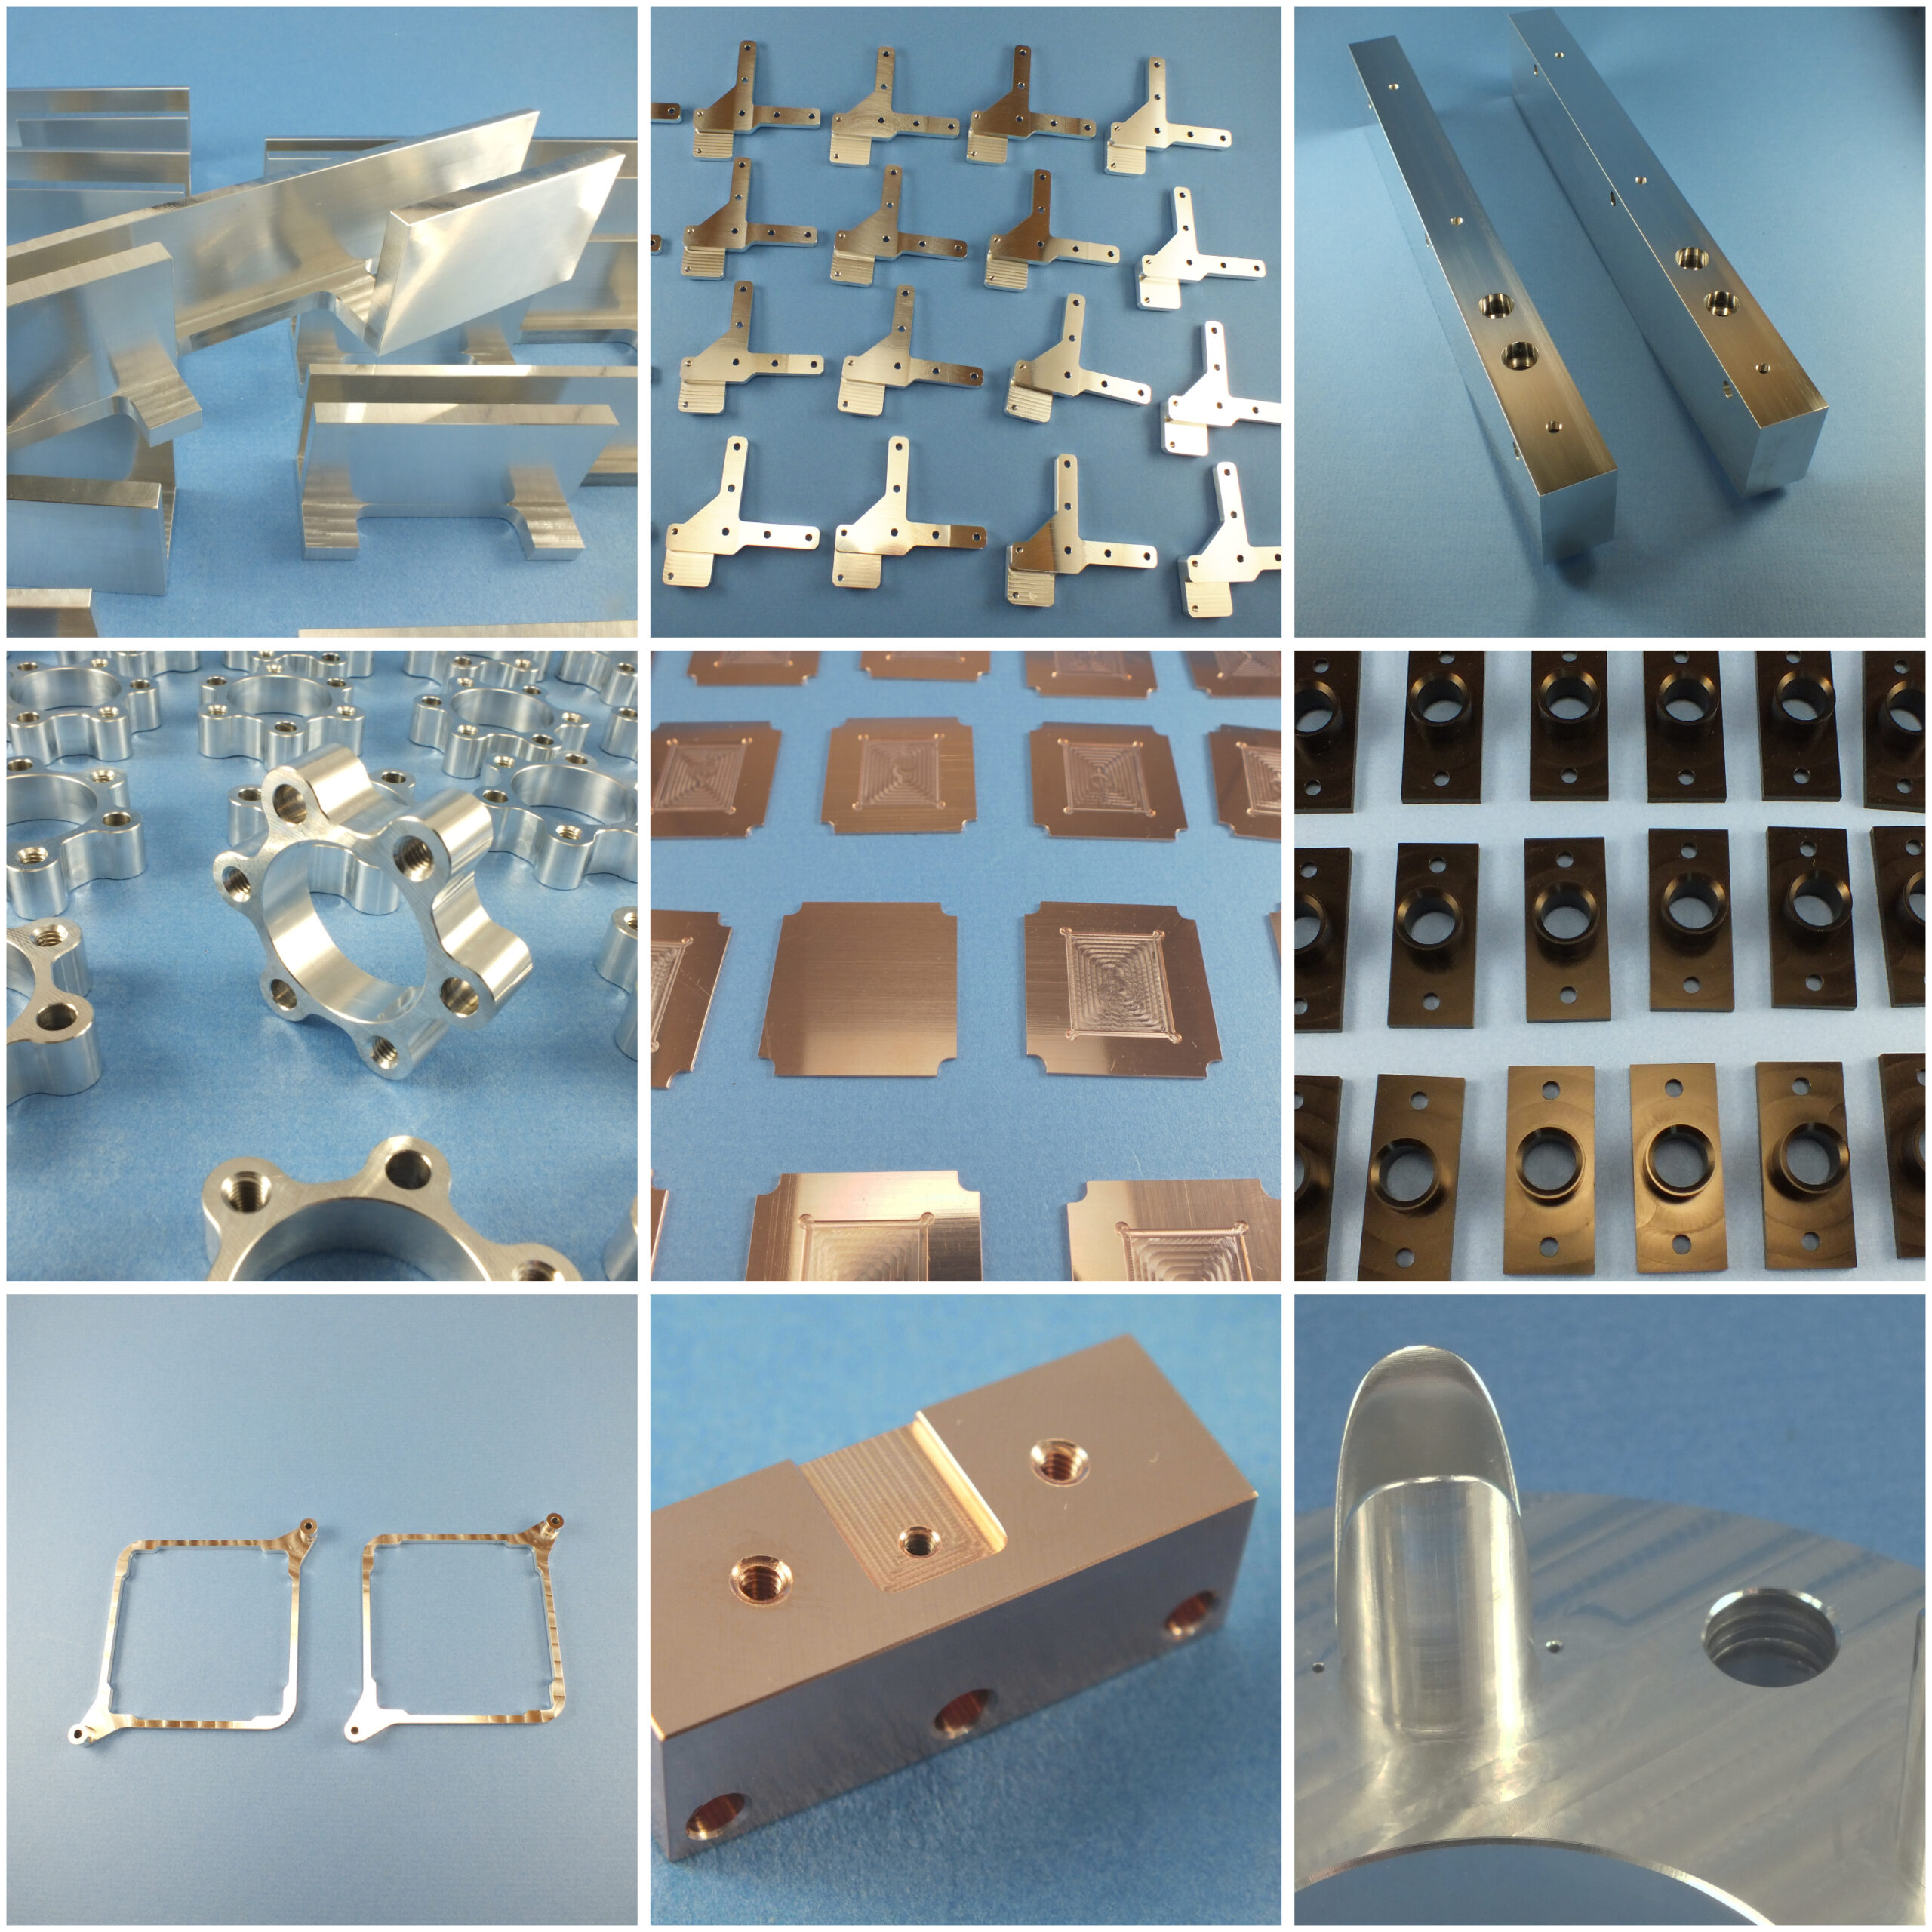 High-quality sample components produced using CNC milling, highlighting the exceptional craftsmanship of Renovo CNC